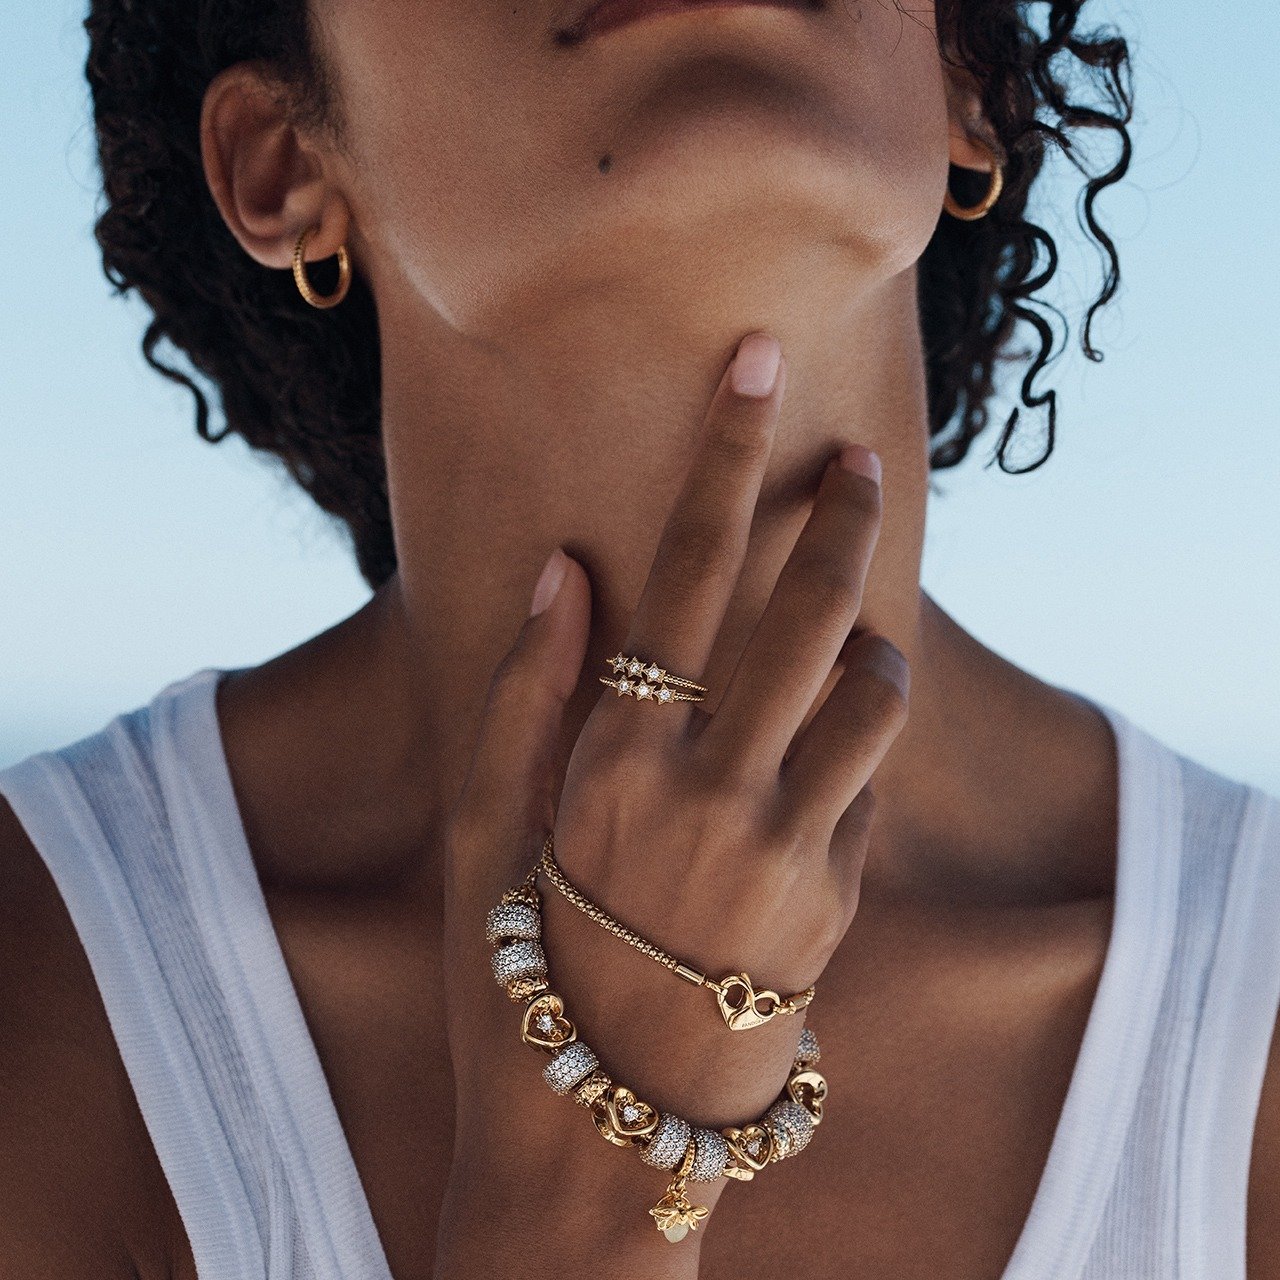 When it comes to stylish jewelry for the Summer, @Pandora has your back! ☀️ 🌊 

From celestial stacking rings to matching freshwater cultured pearl treasures, these pieces shine brightest stacked and styled together. ✨ 💎 

Pandora products make bea